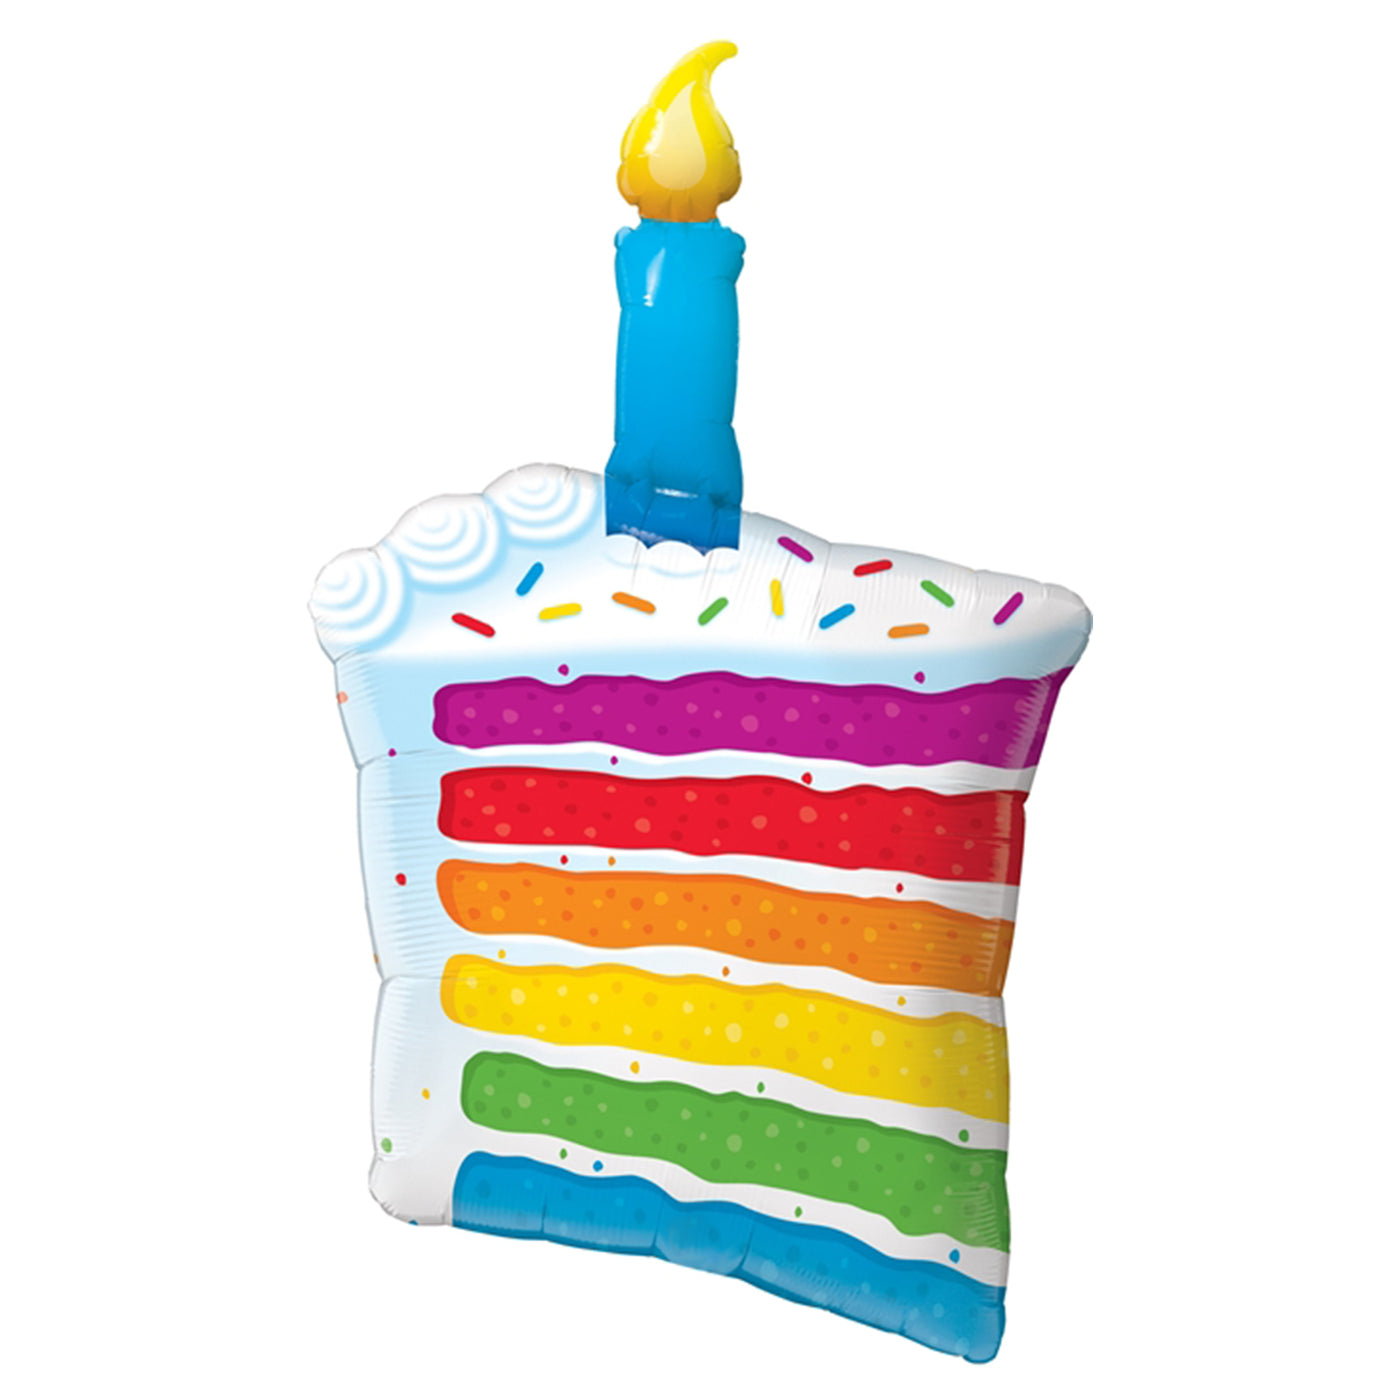 Rainbow Cake and Candle Balloon